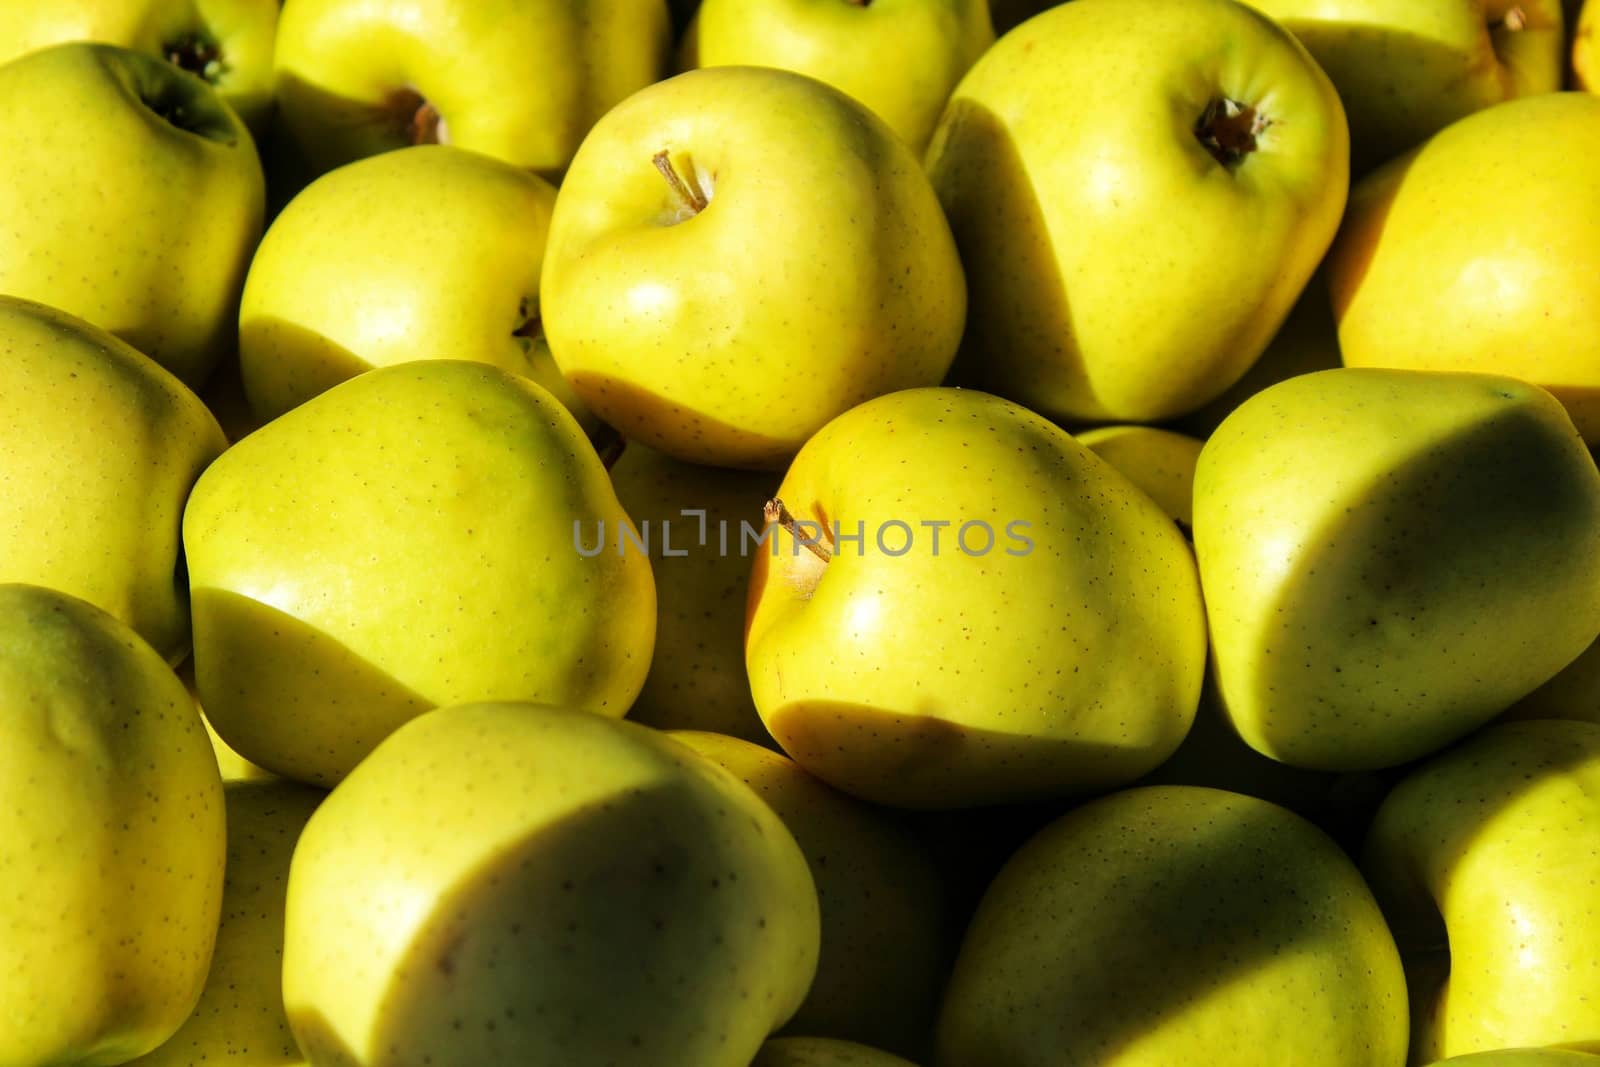 Apples for sale at a market stall by soniabonet